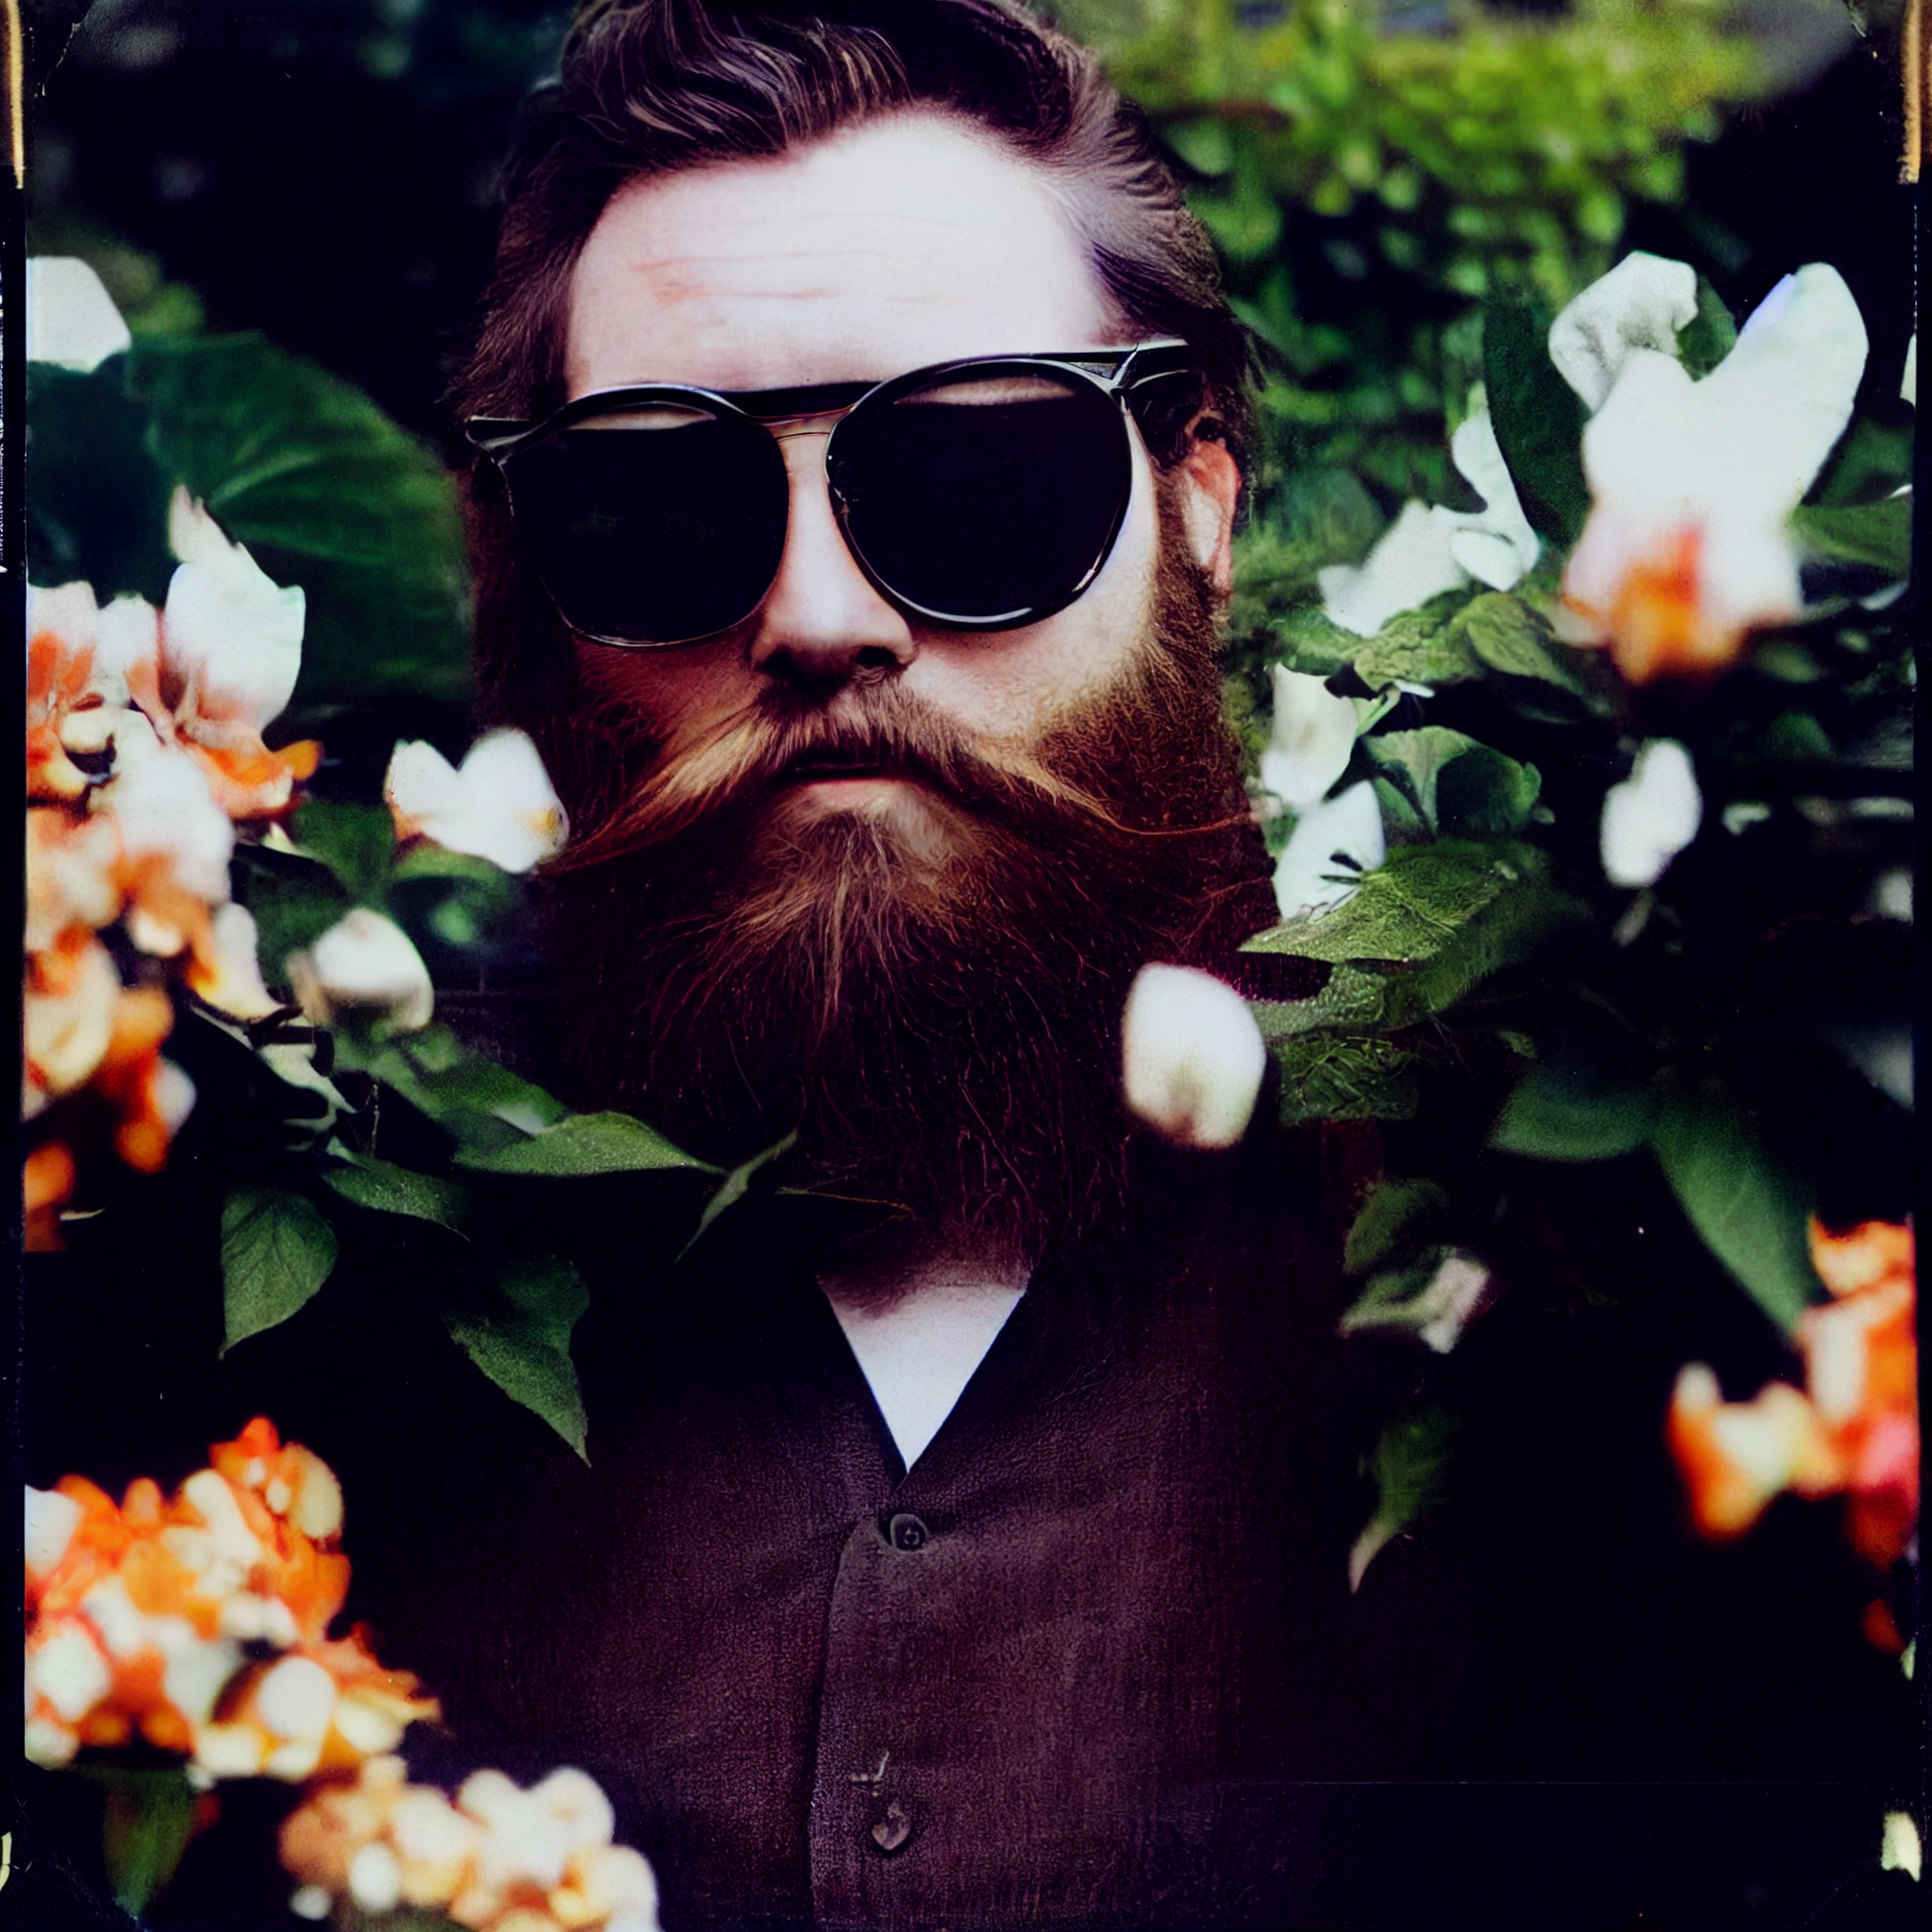 EricdeBroche_Raymond_Trace_with_a_beard_and_enormous_sunglasses_2289b550-8c75-4194-bb04-447854d85782.png